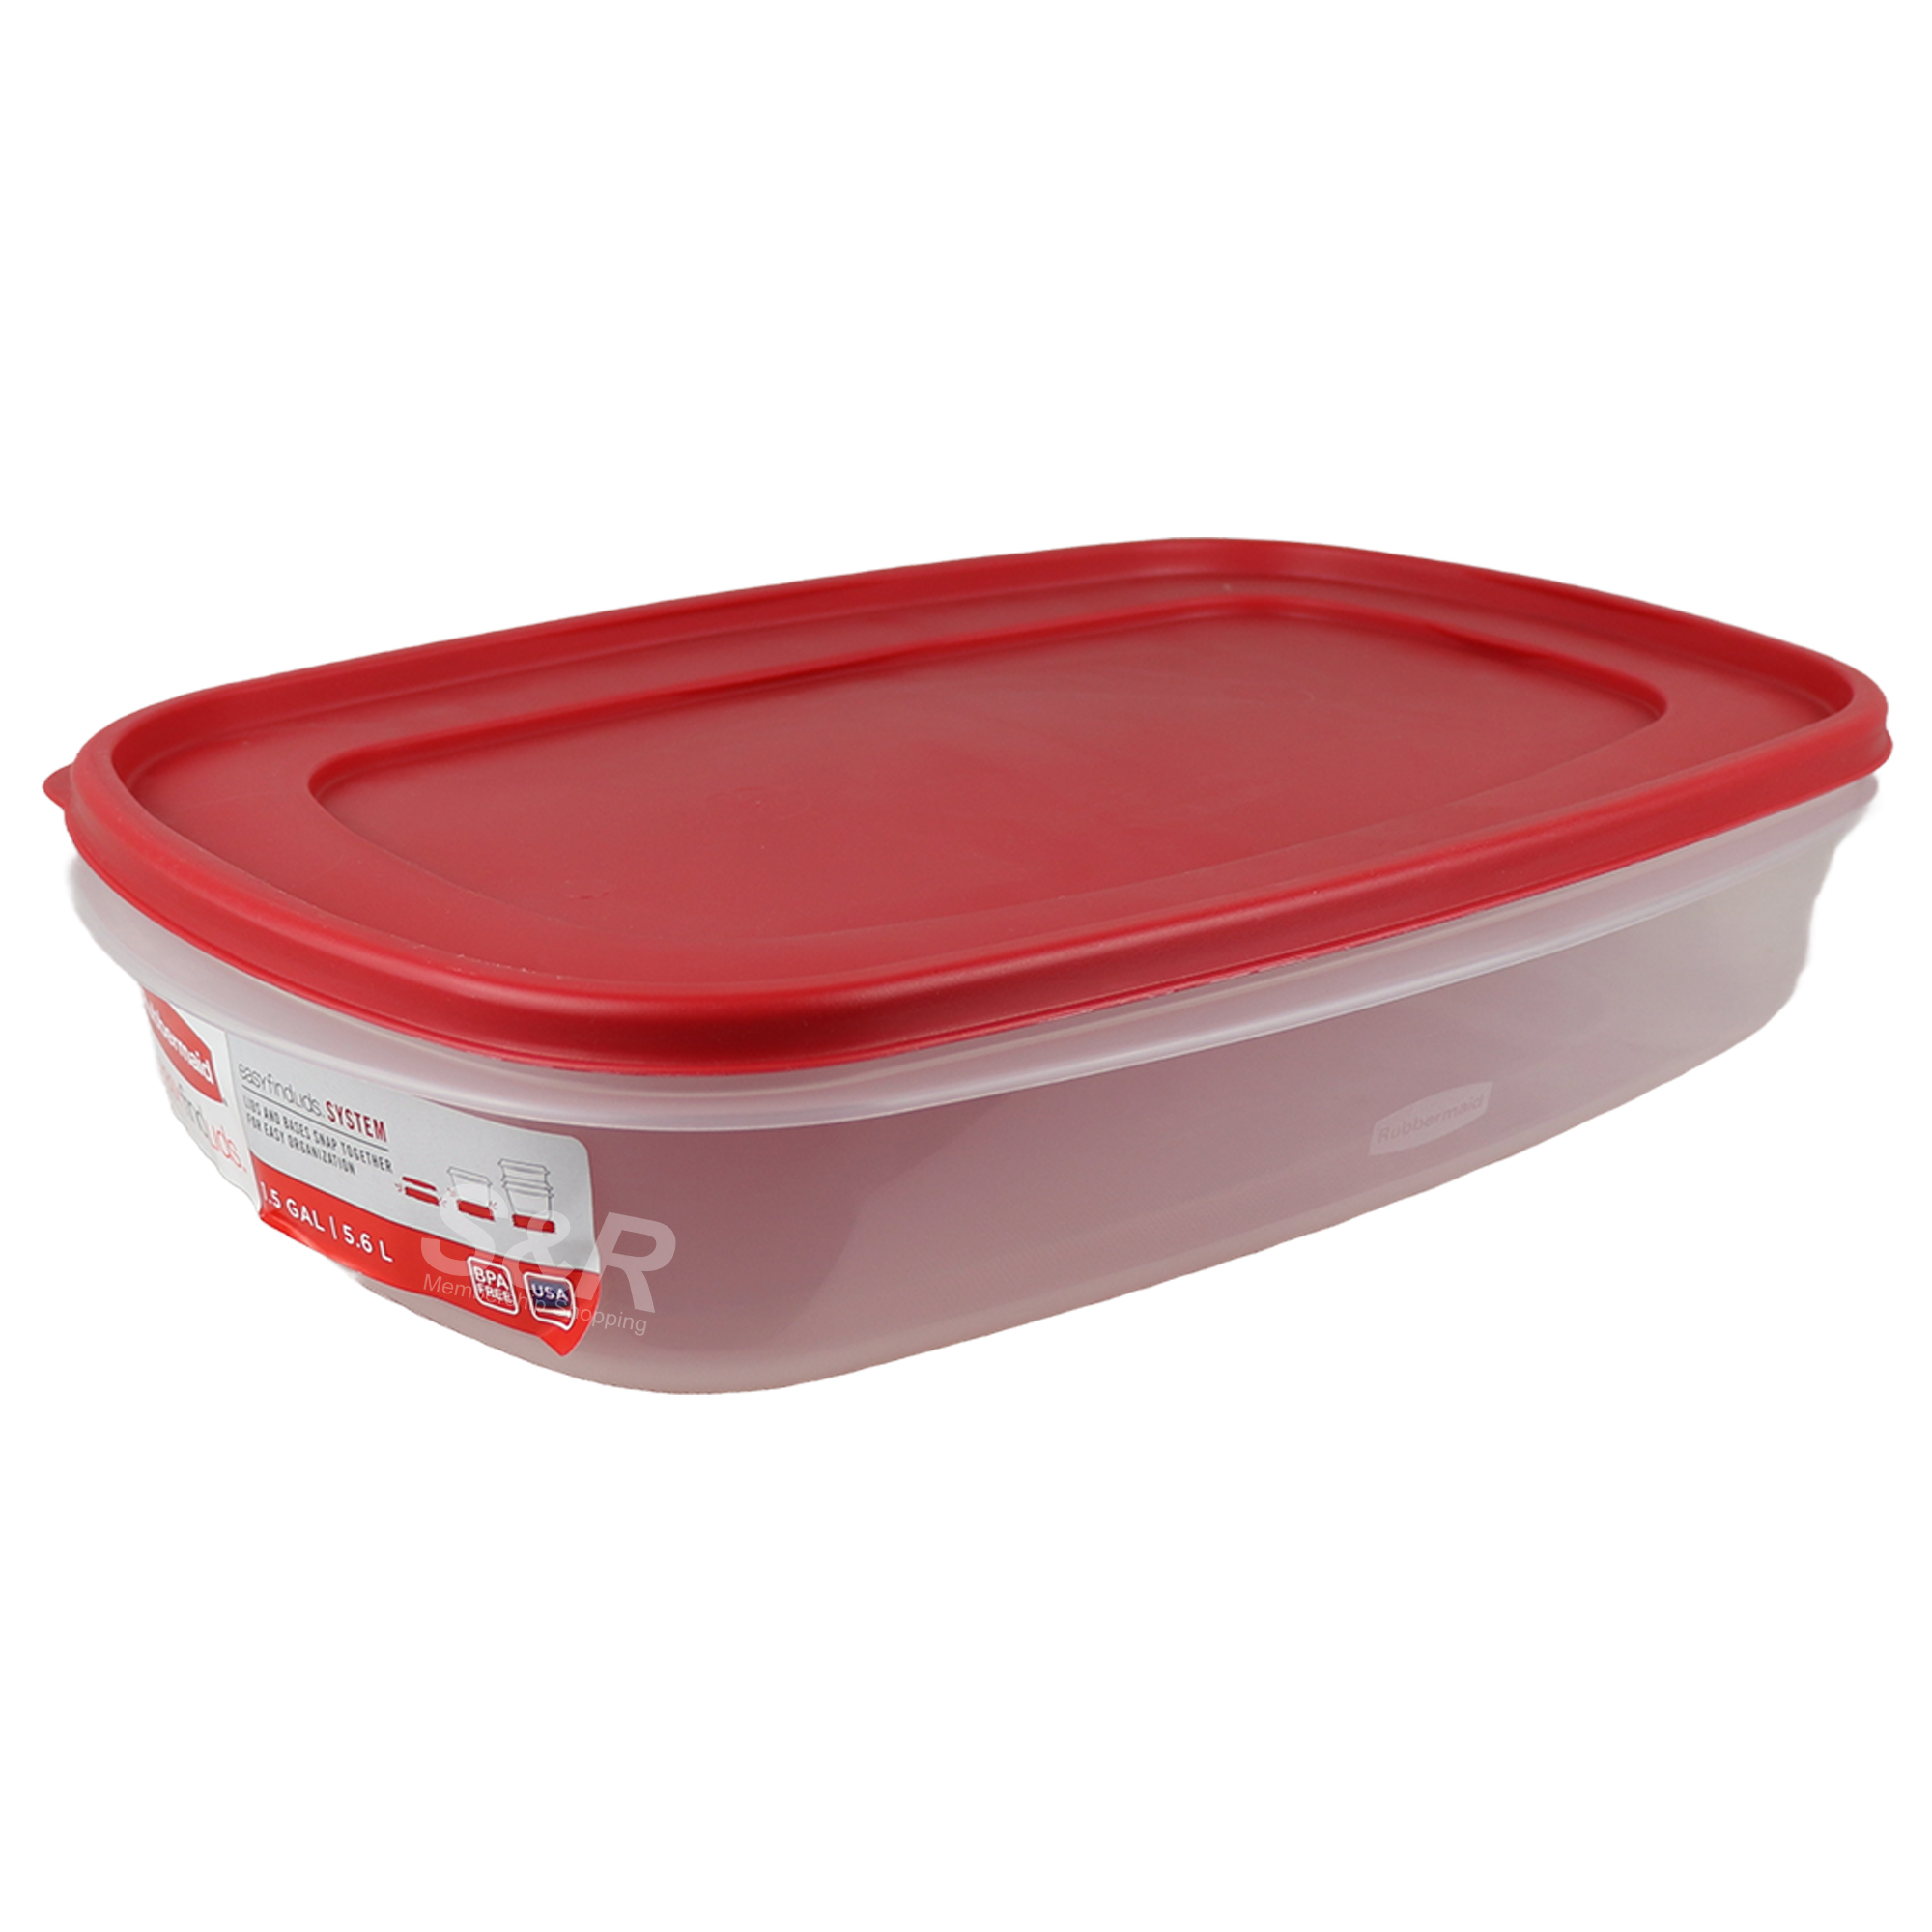 Rubbermaid Easy Find Lids System Rectangle Container 5.6L